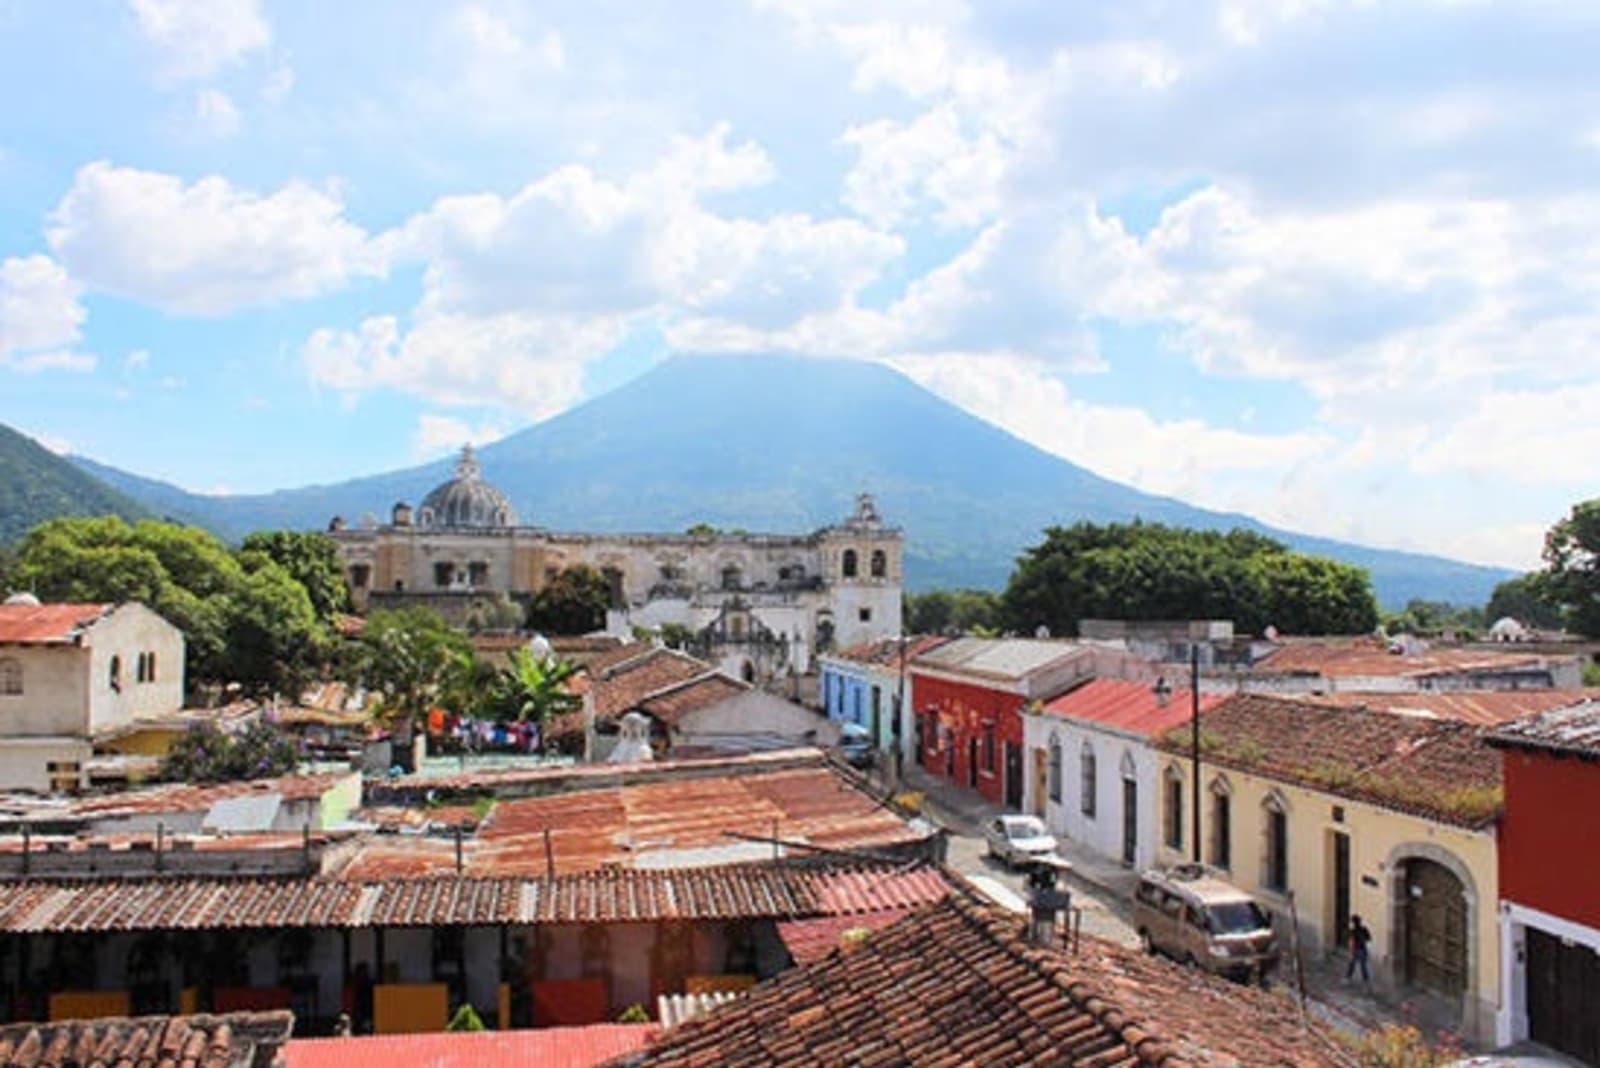 View over rooftops in Guatemala with volcano in the background.